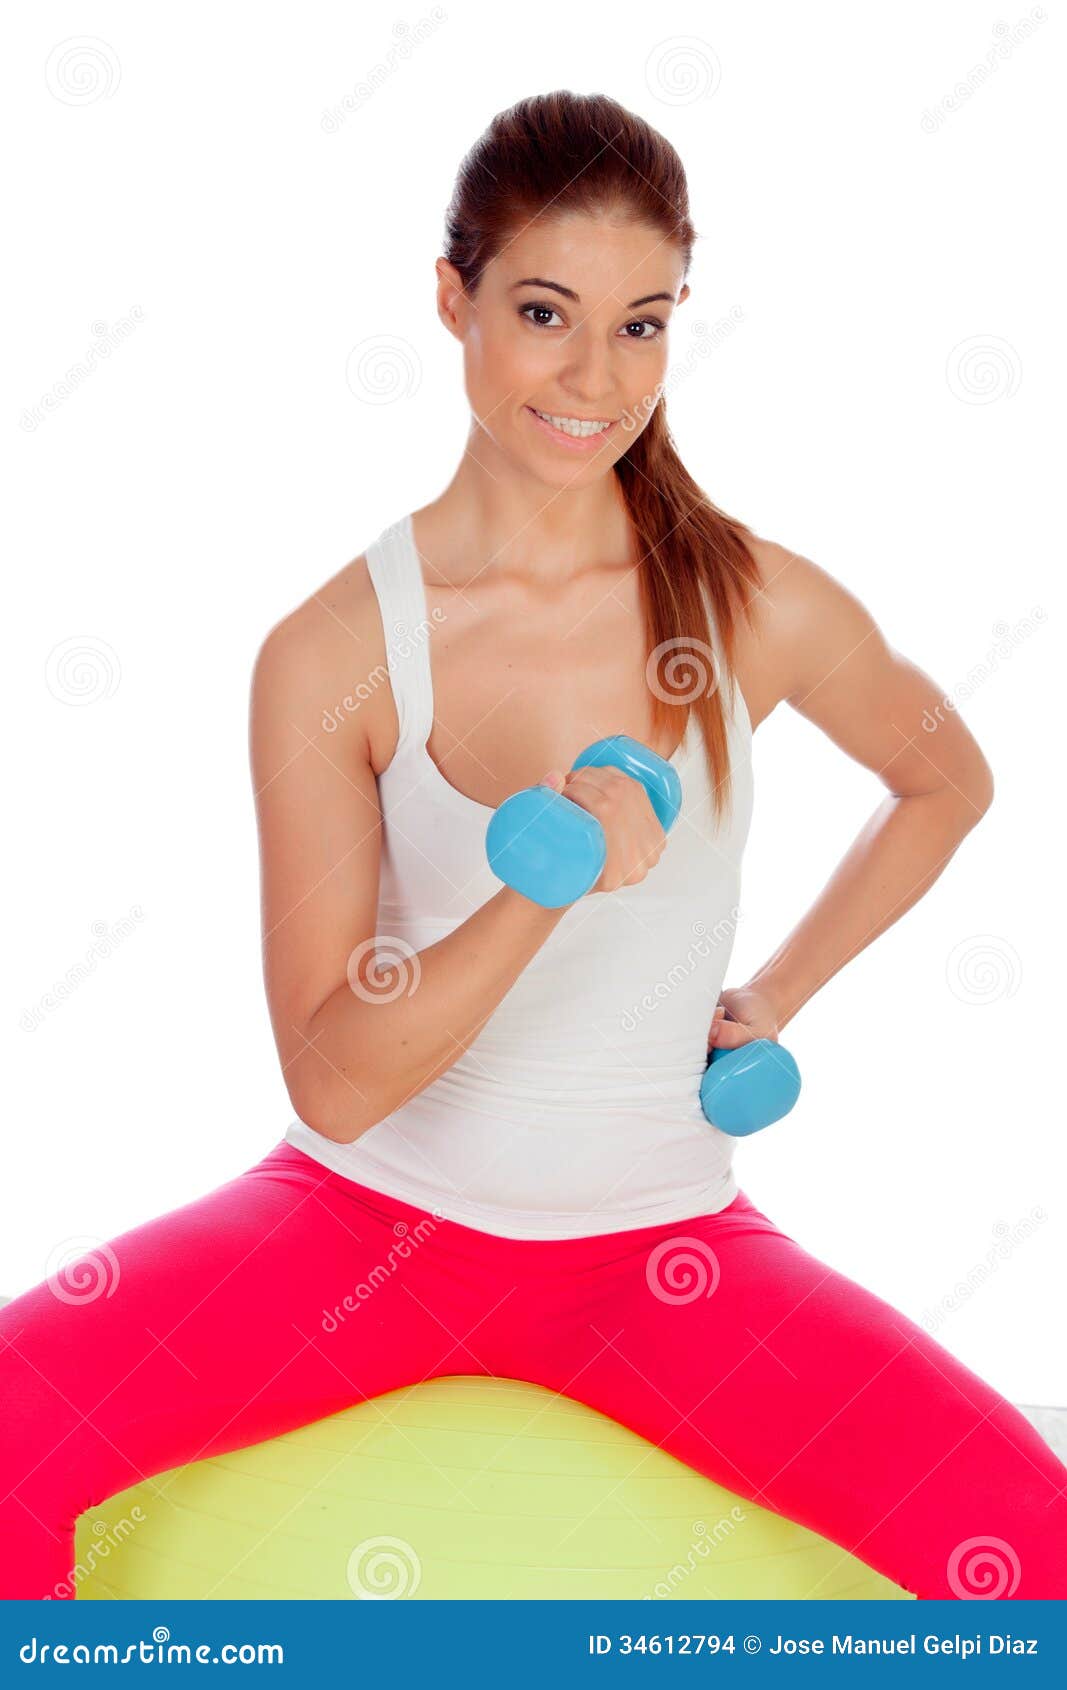 attractive-girl-toning-muscles-isolated-white-background-34612794.jpg